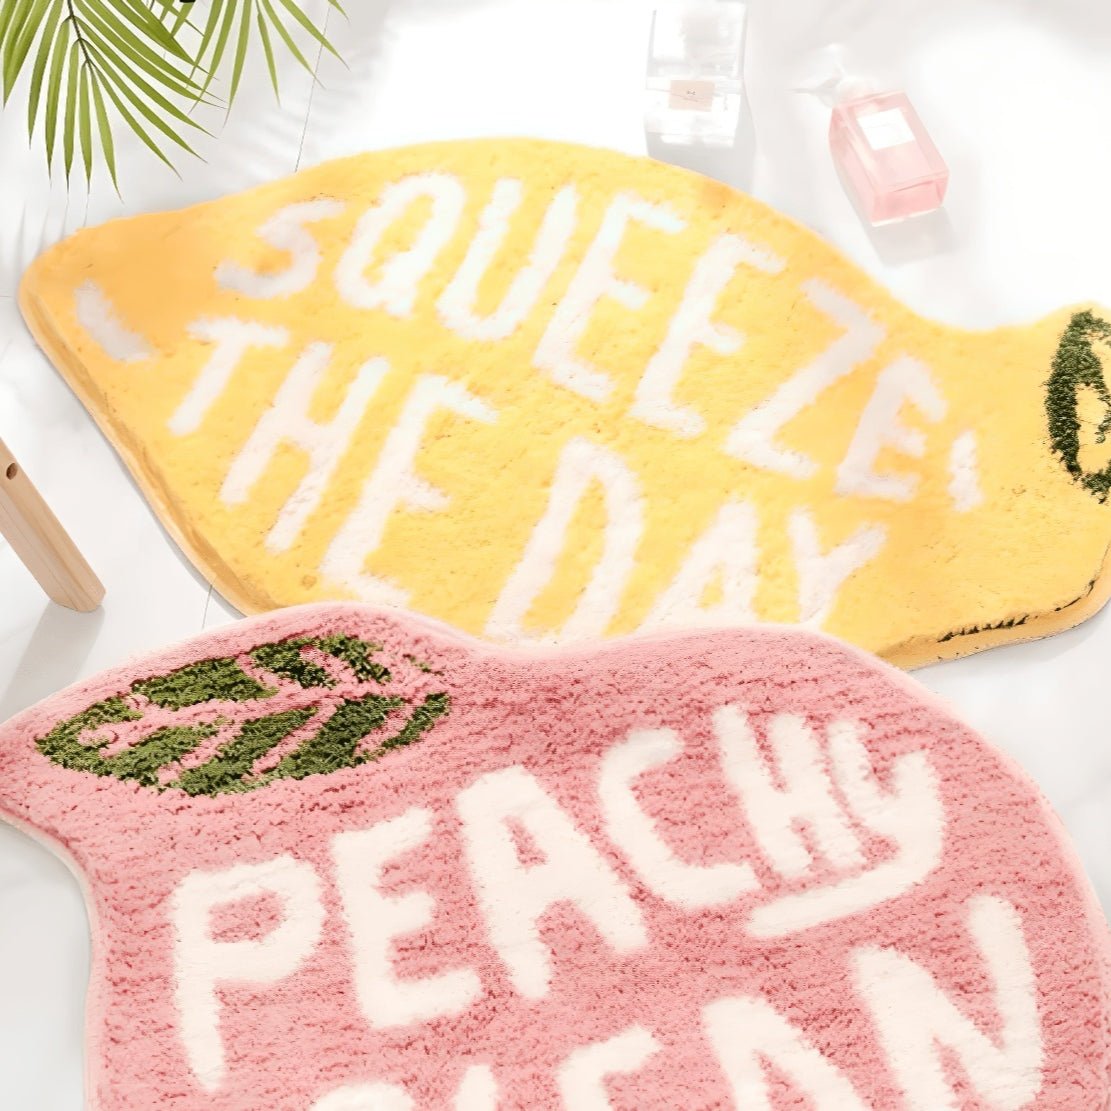 Yellow lemon bathmat with text "Squeeze the Day" and a pink, peach bathmat with text "Peachy Clean"